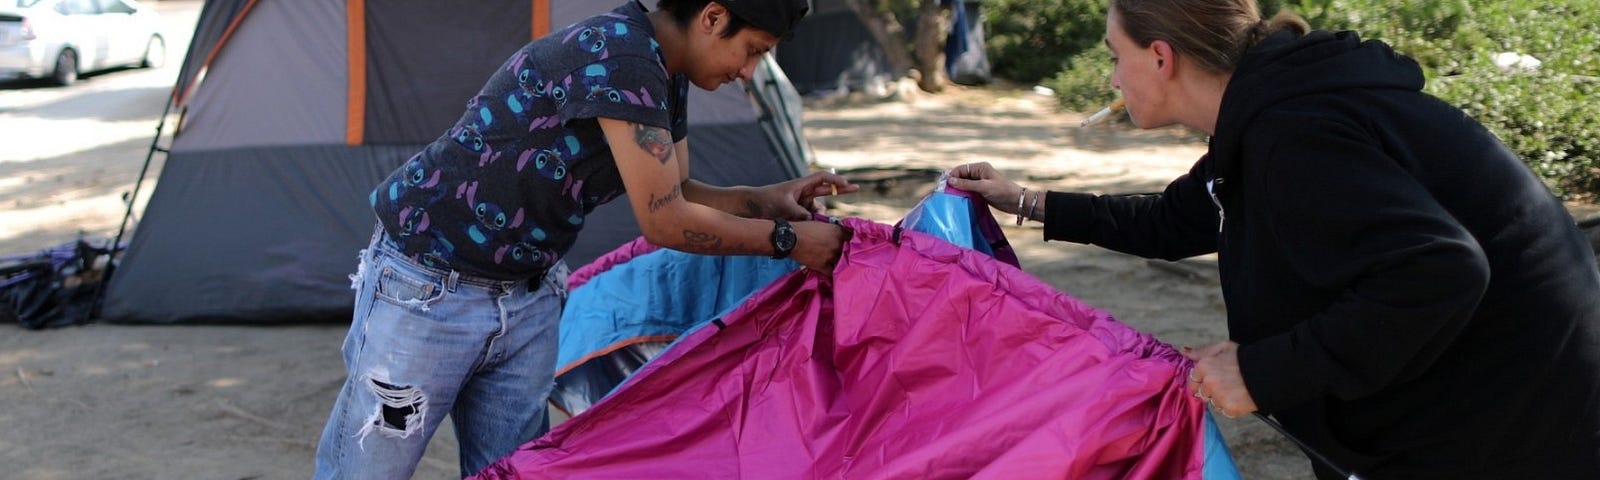 Christina Bojorquez and Kimberly Decoursey pitch a tent in Los Angeles, CA, October 14, 2019. Photo by Lucy Nicholson/Reuters